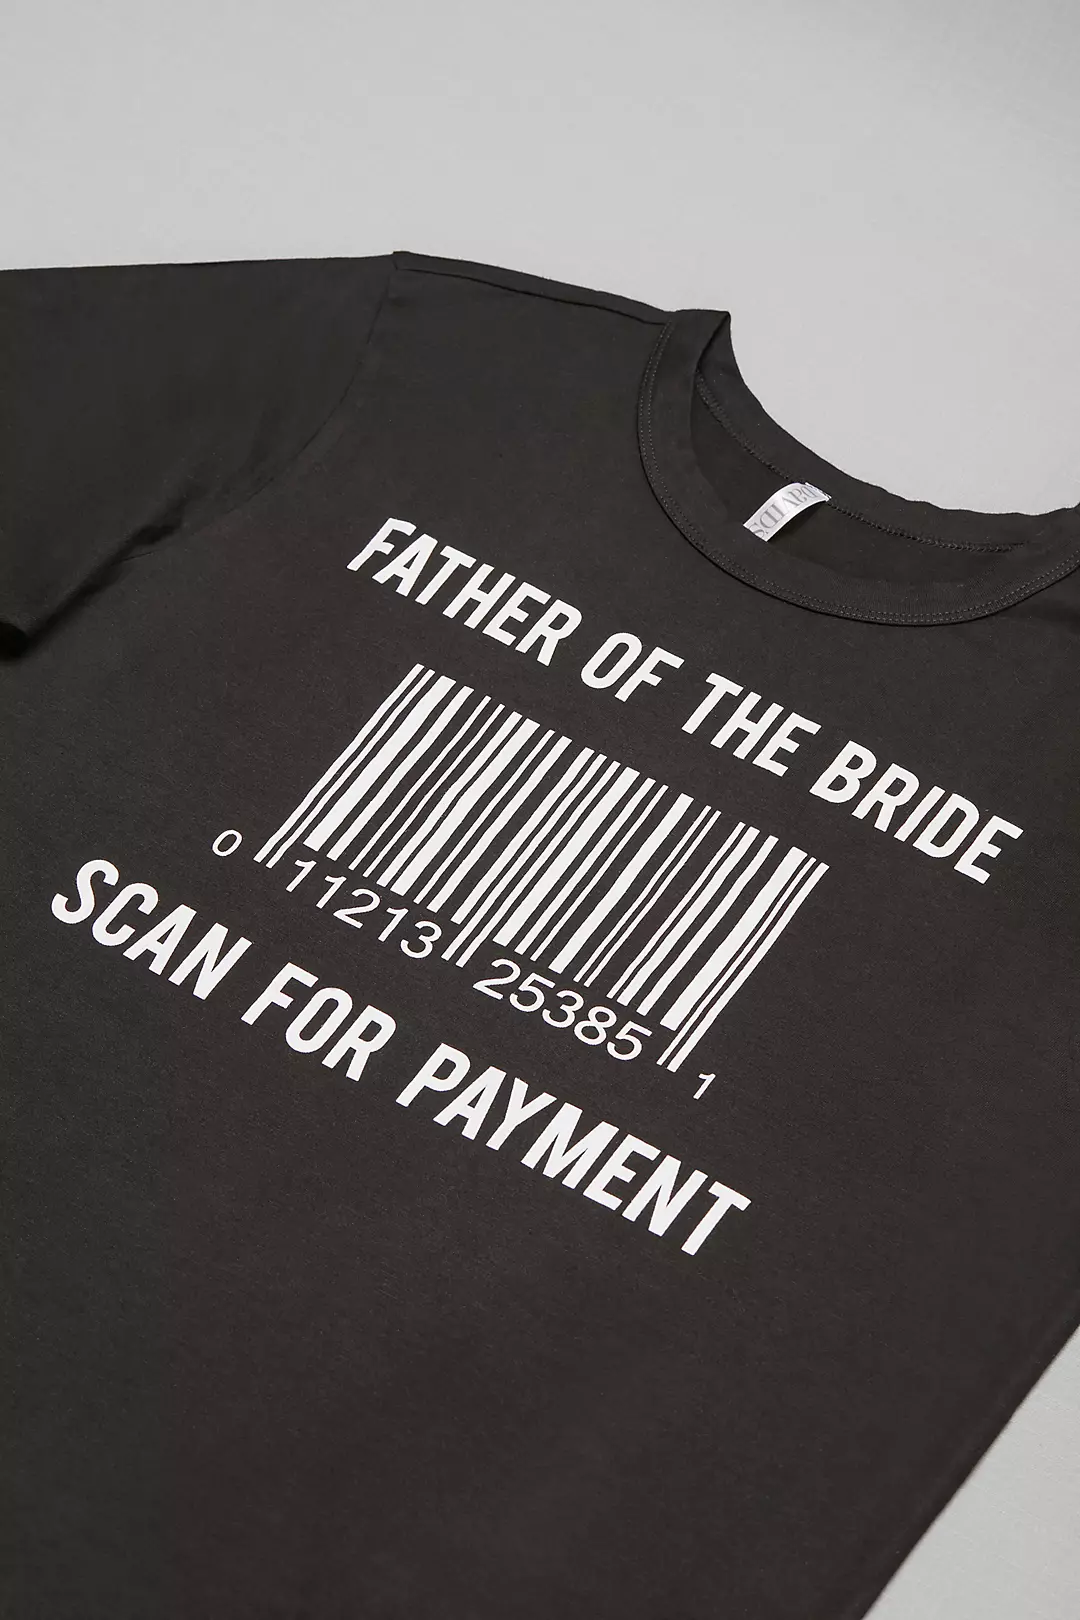 Scan for Payment Dad's Tee Image 2